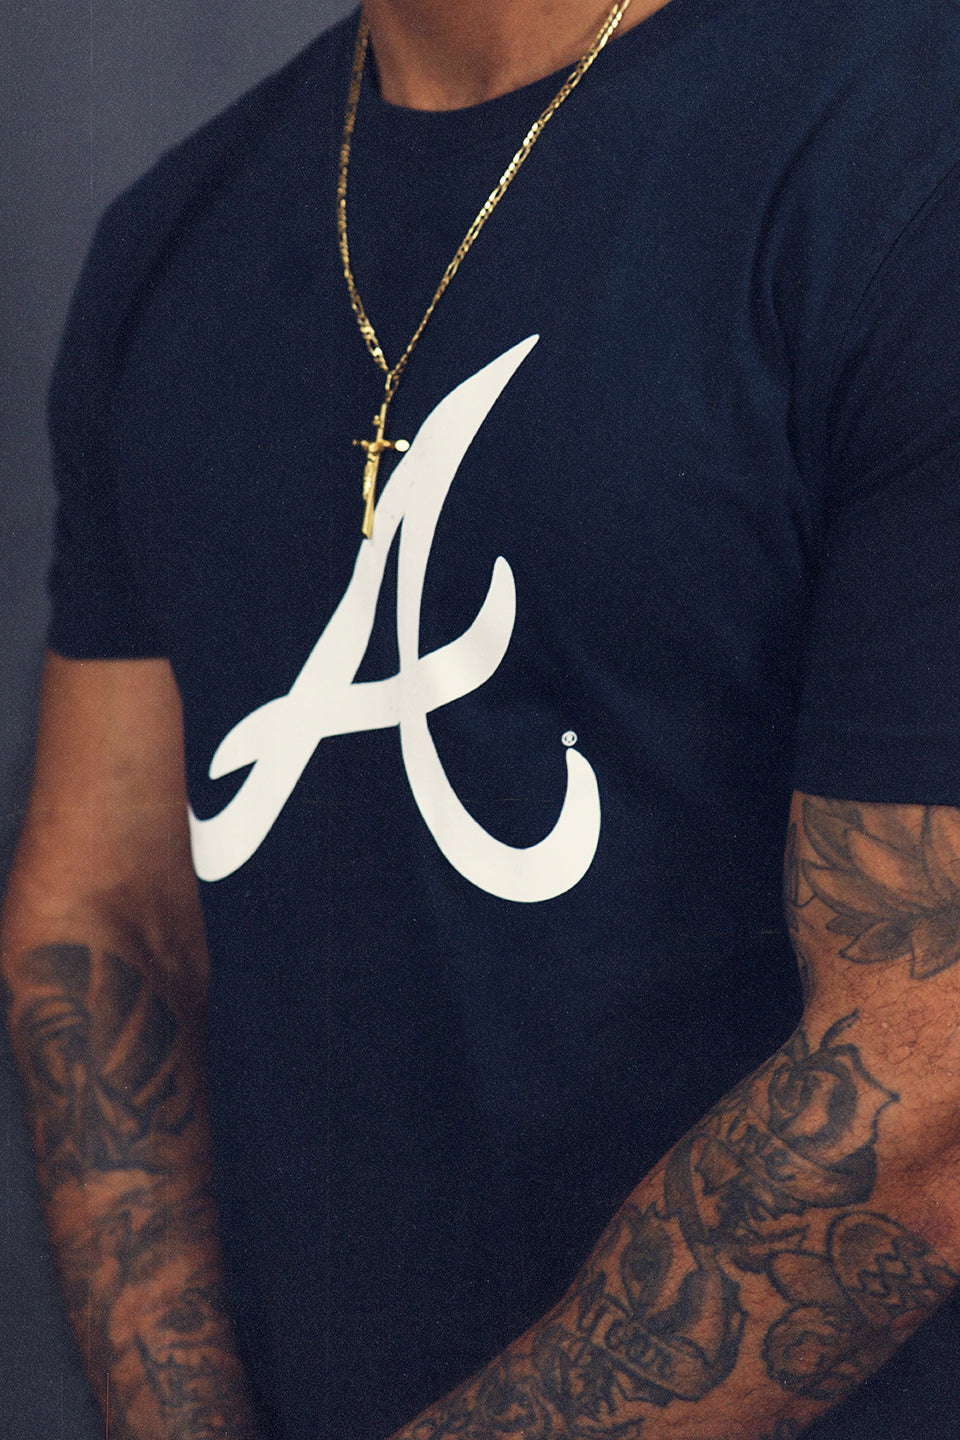 Atlanta Braves "City Transit" 59Fifty Fitted Matching Navy T-Shirt